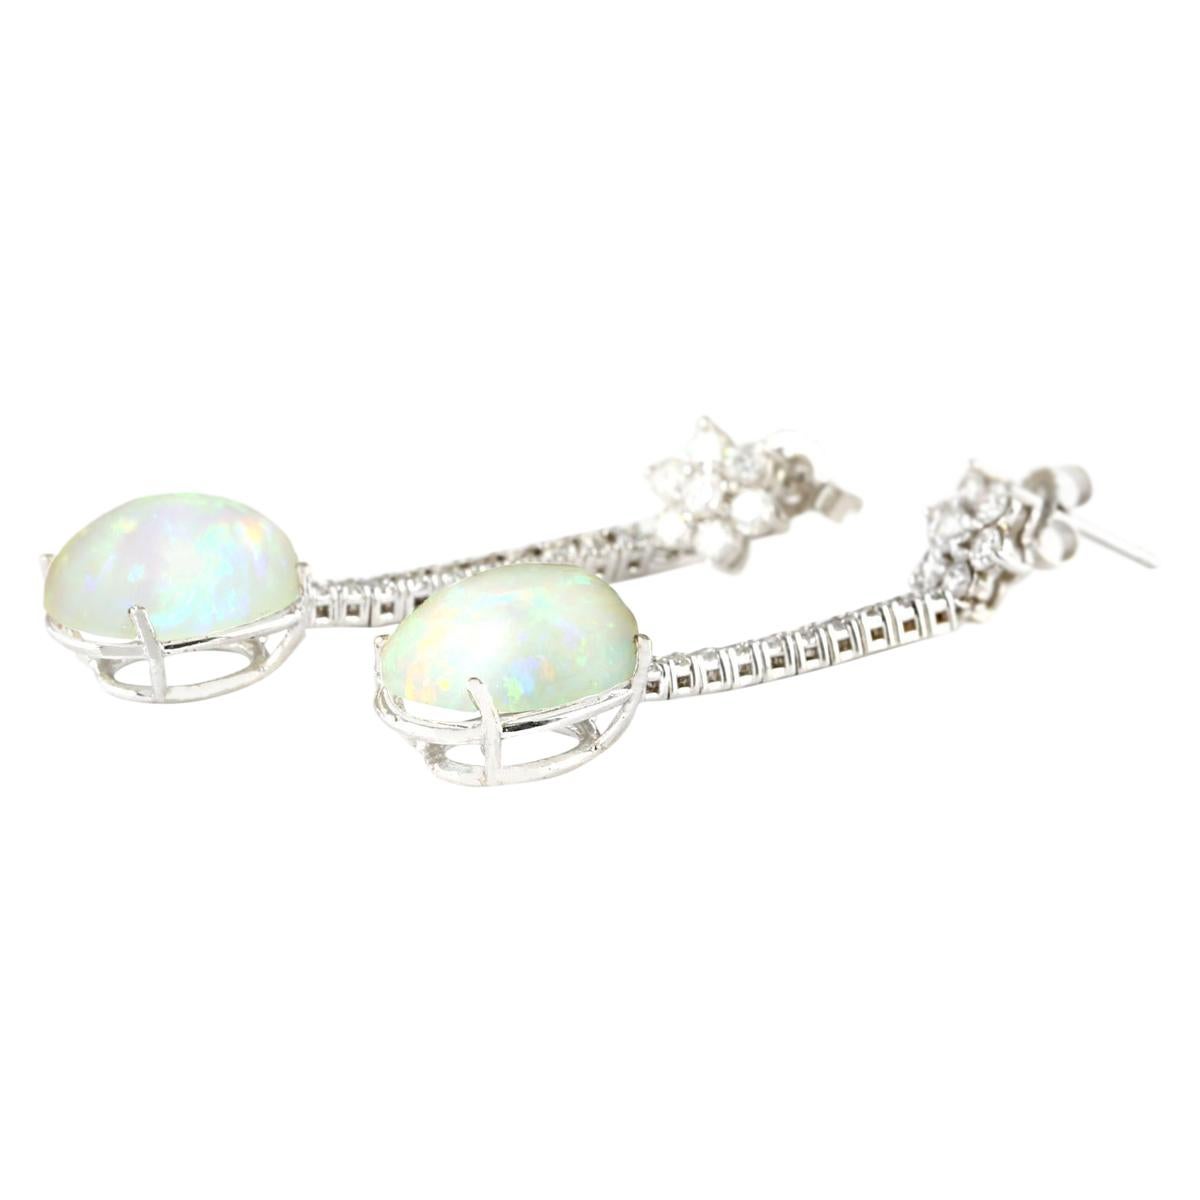 7.87 Carat Natural Opal 14 Karat White Gold Diamond Earrings
Stamped: 14K White Gold
Total Earrings Weight: 5.3 Grams
Earrings Length: 1.60 Inches
Total Natural Opal Weight is 6.87 Carat (Measures: 14.00x10.00 mm)
Color: Multicolor
Total Natural